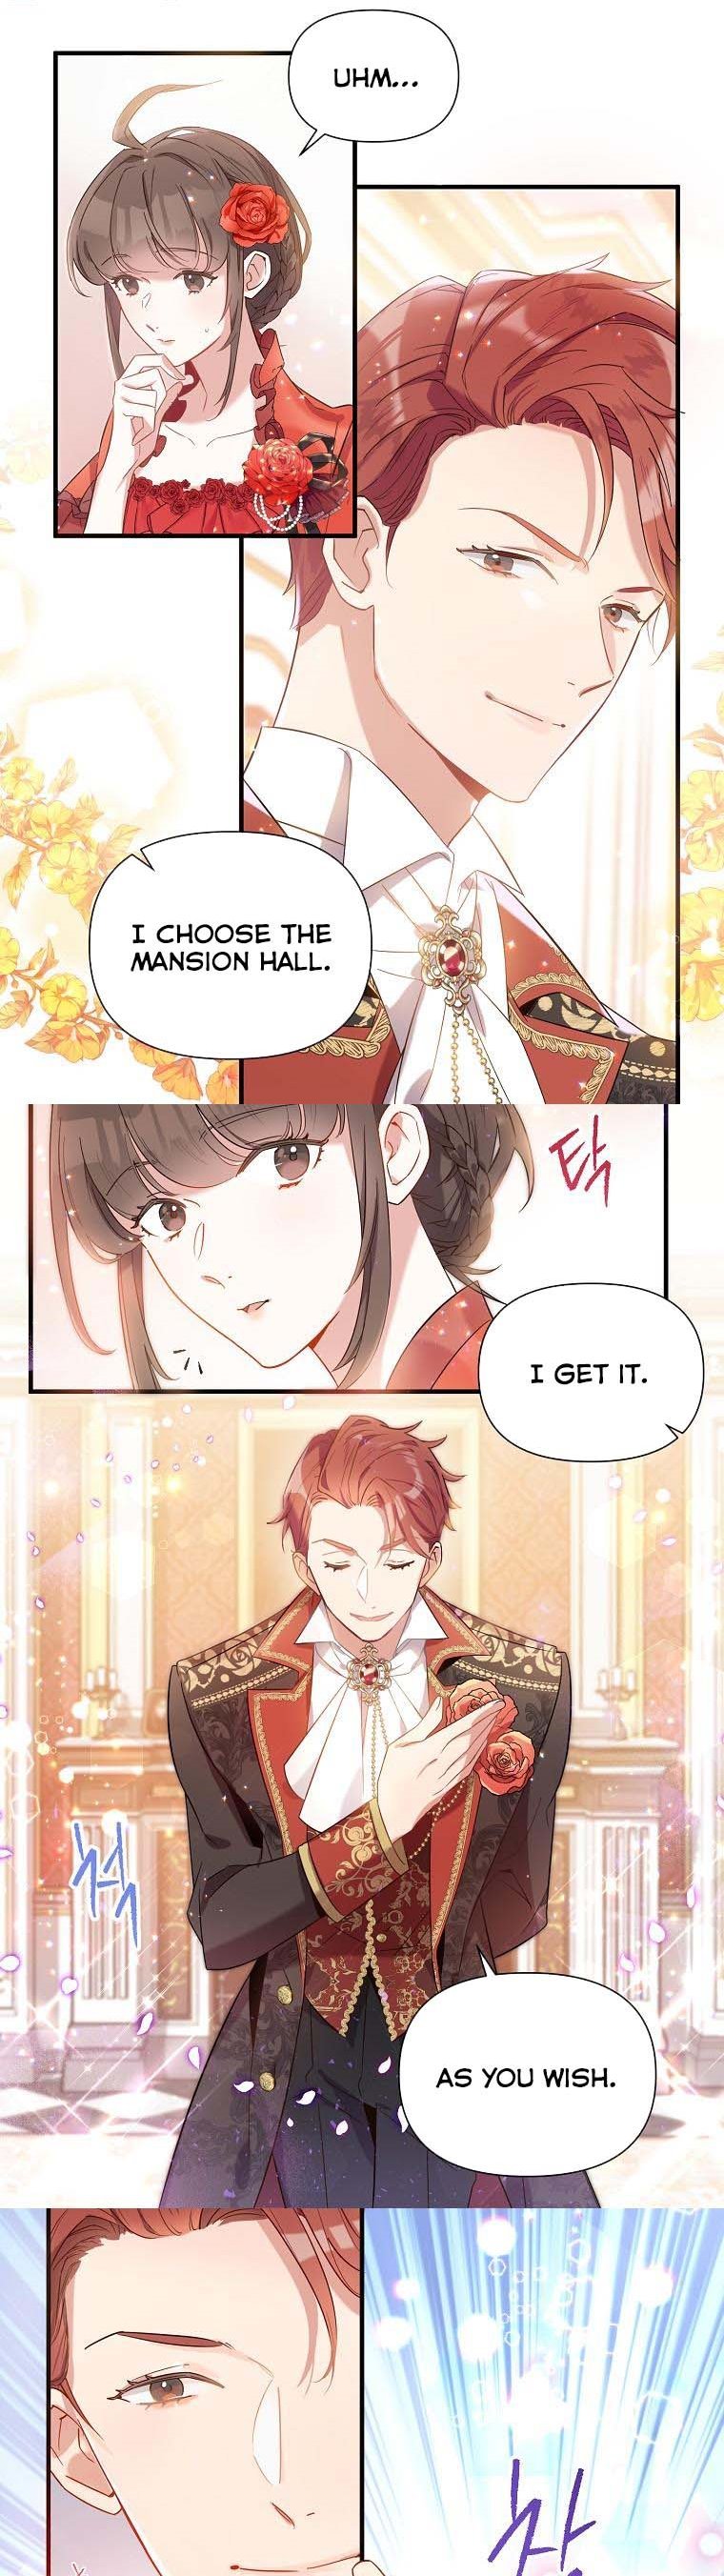 Marriage B chapter 17